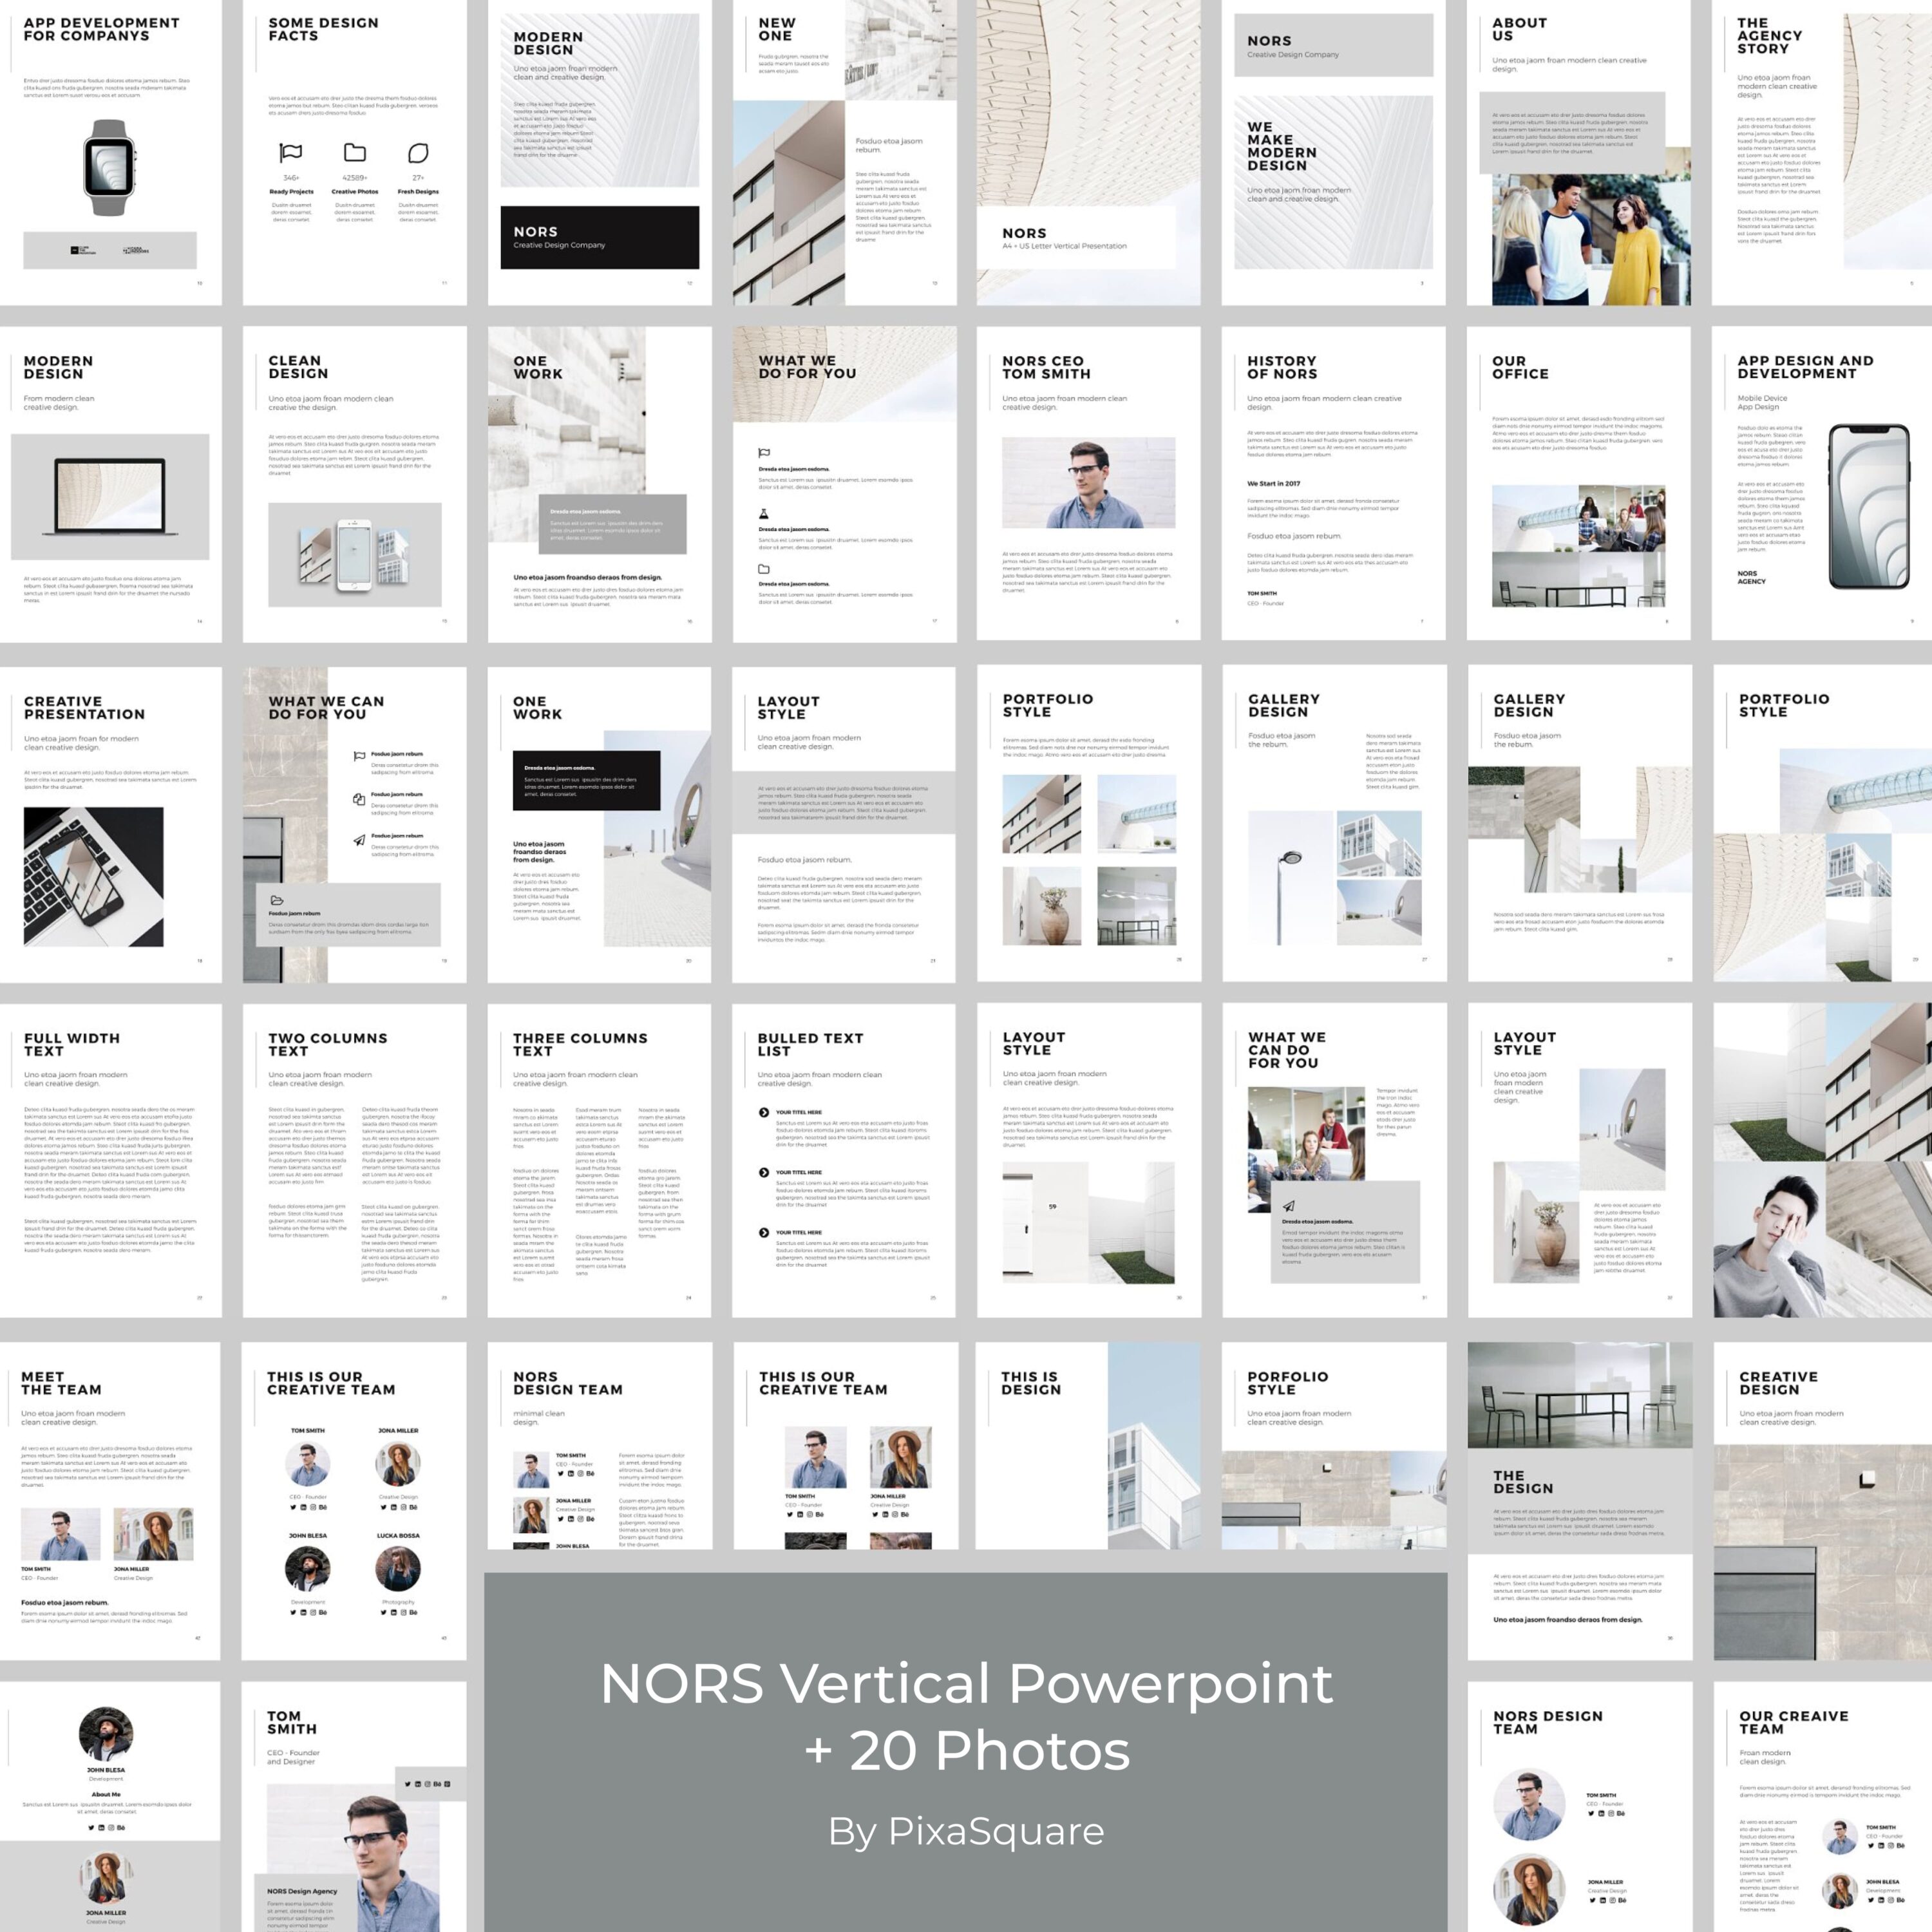 NORS Vertical Powerpoint + 20 Photos cover.